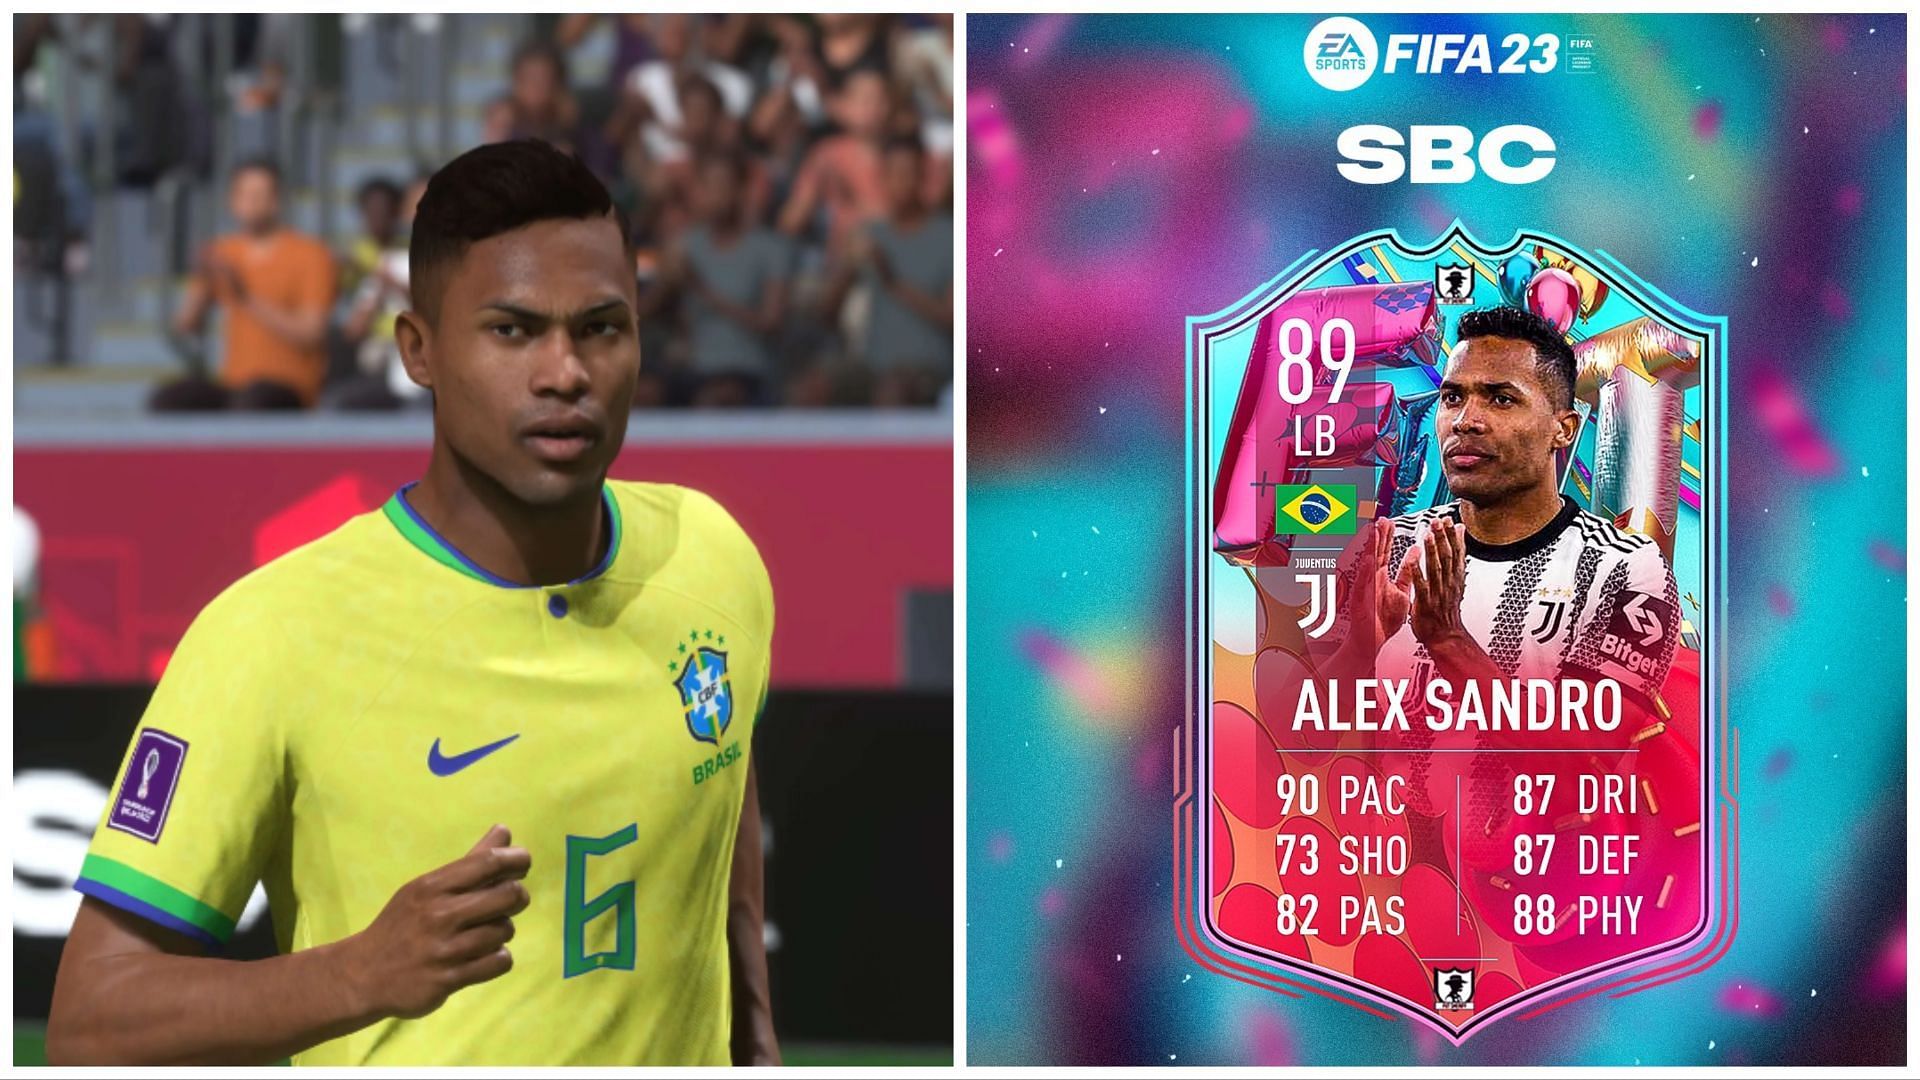 FUT Birthday Alex Sandro has been leaked (Images via EA Sports and Twitter/FUT Sheriff)